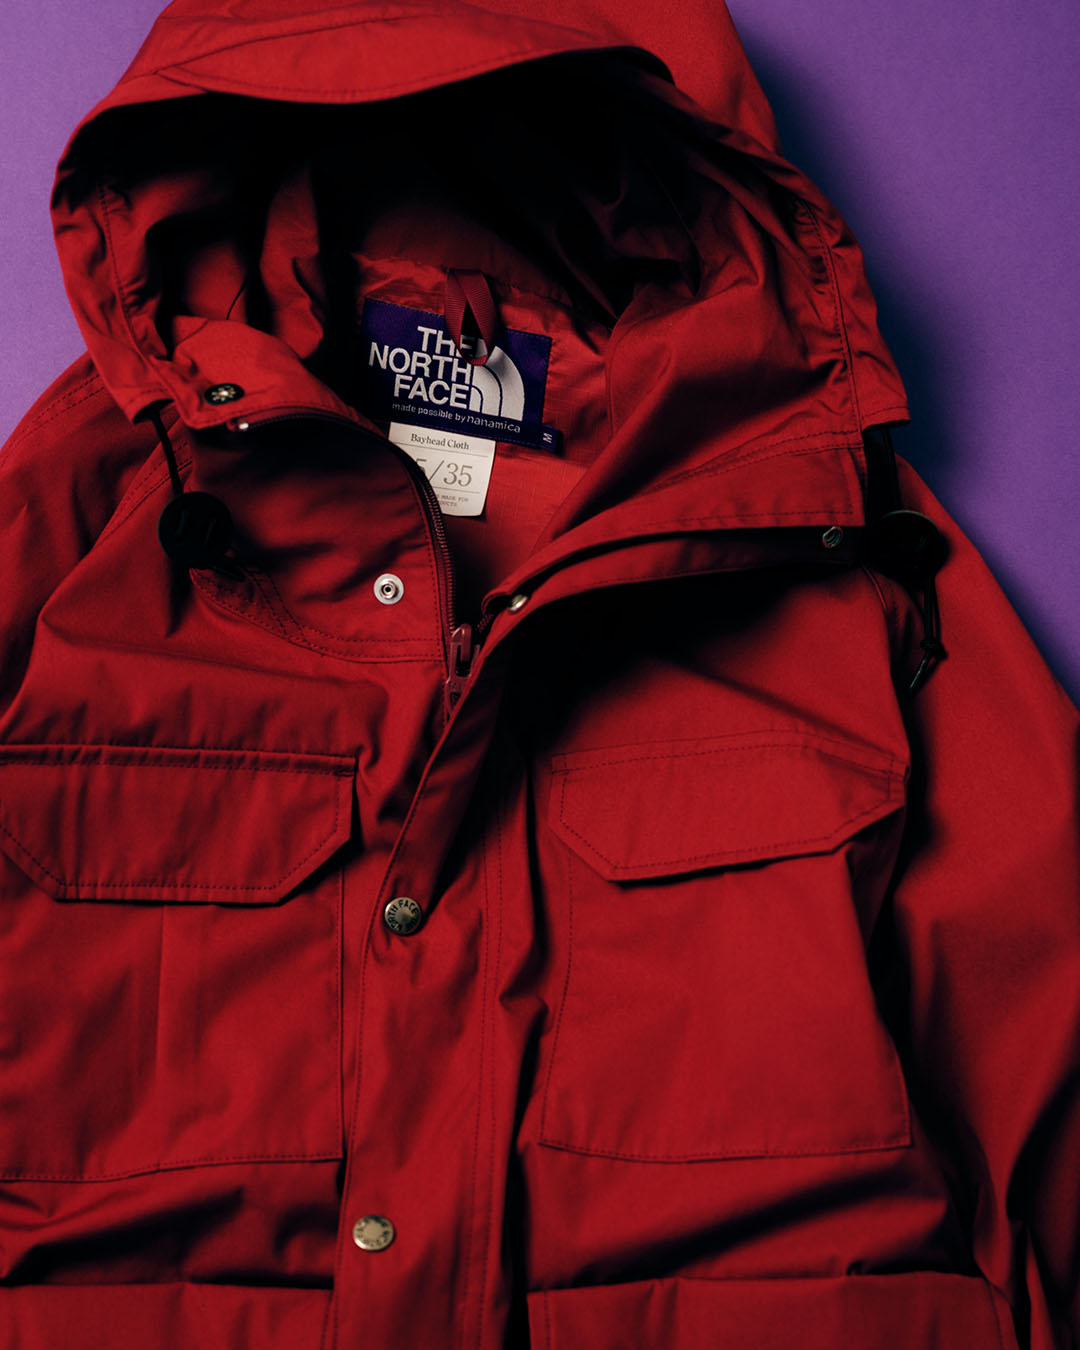 nanamica / THE NORTH FACE PURPLE LABEL / Featured Product vol.33